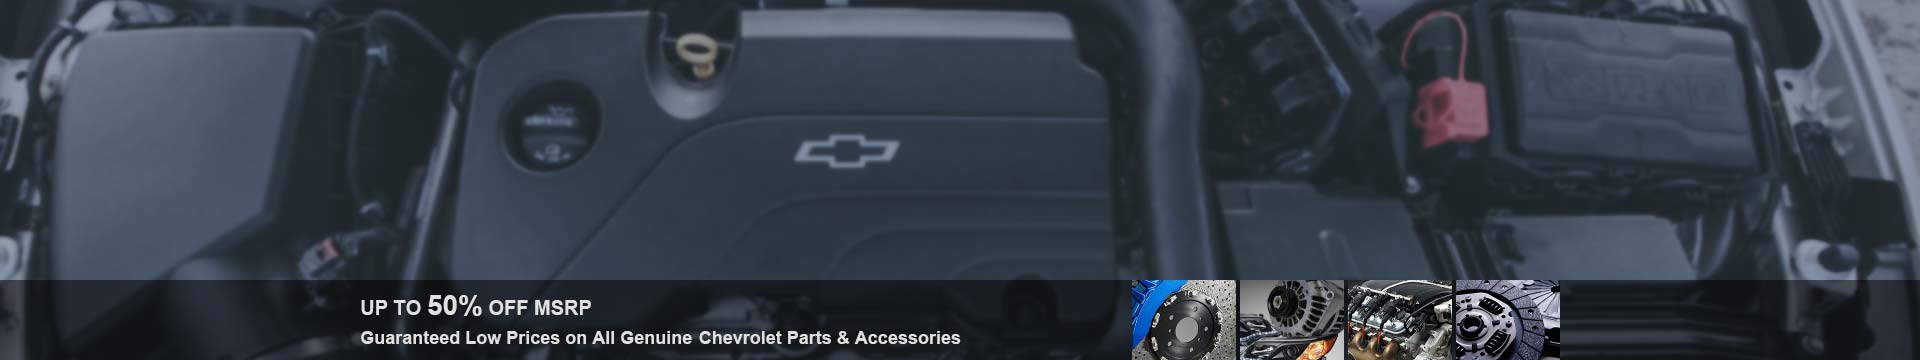 Guaranteed low prices on all Genuine Chevrolet Cruze parts